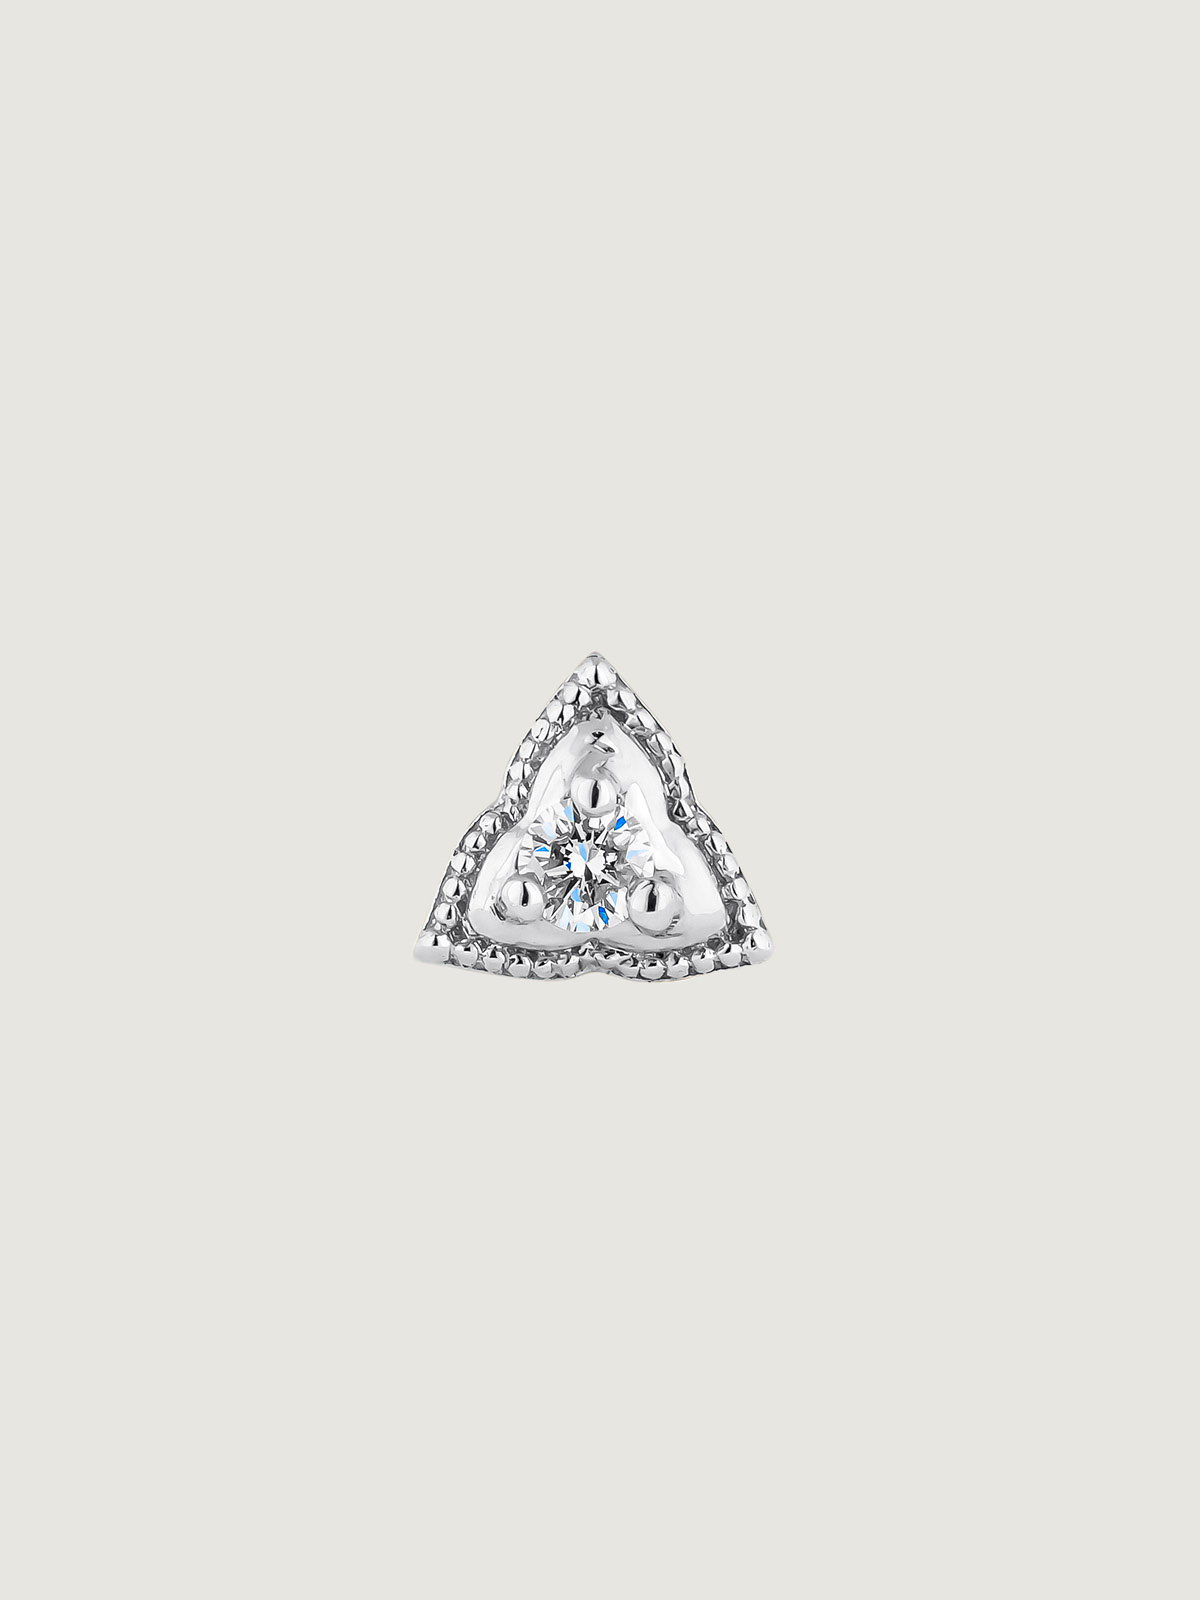 18K white gold individual earring with diamond and triangular shape.